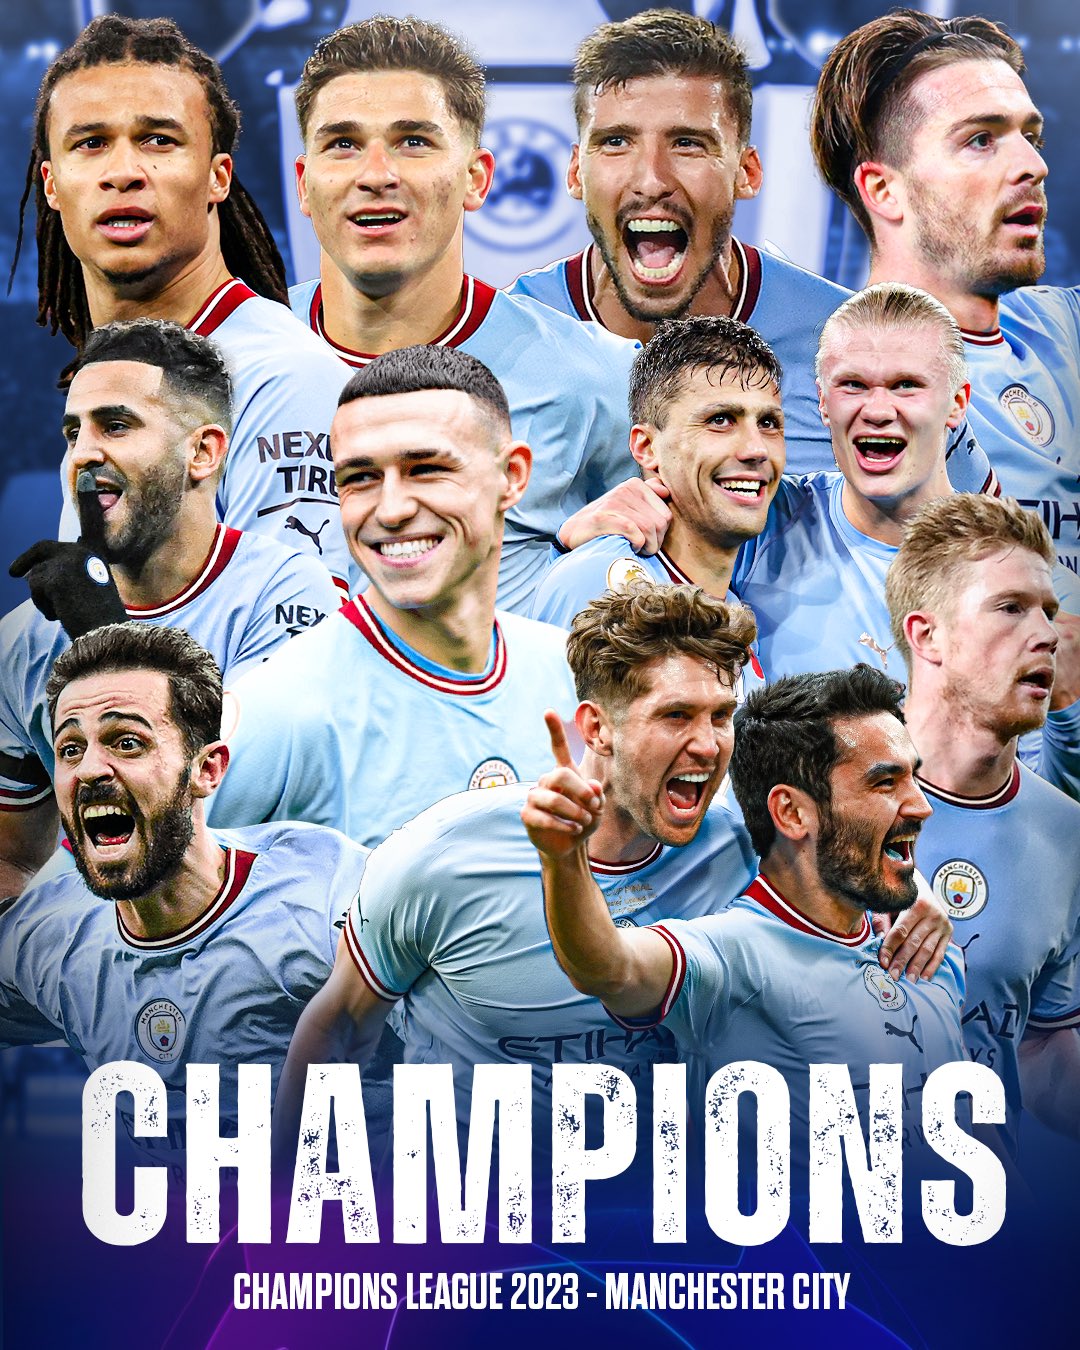 Manchester City IPhone Wallpaper 74 images